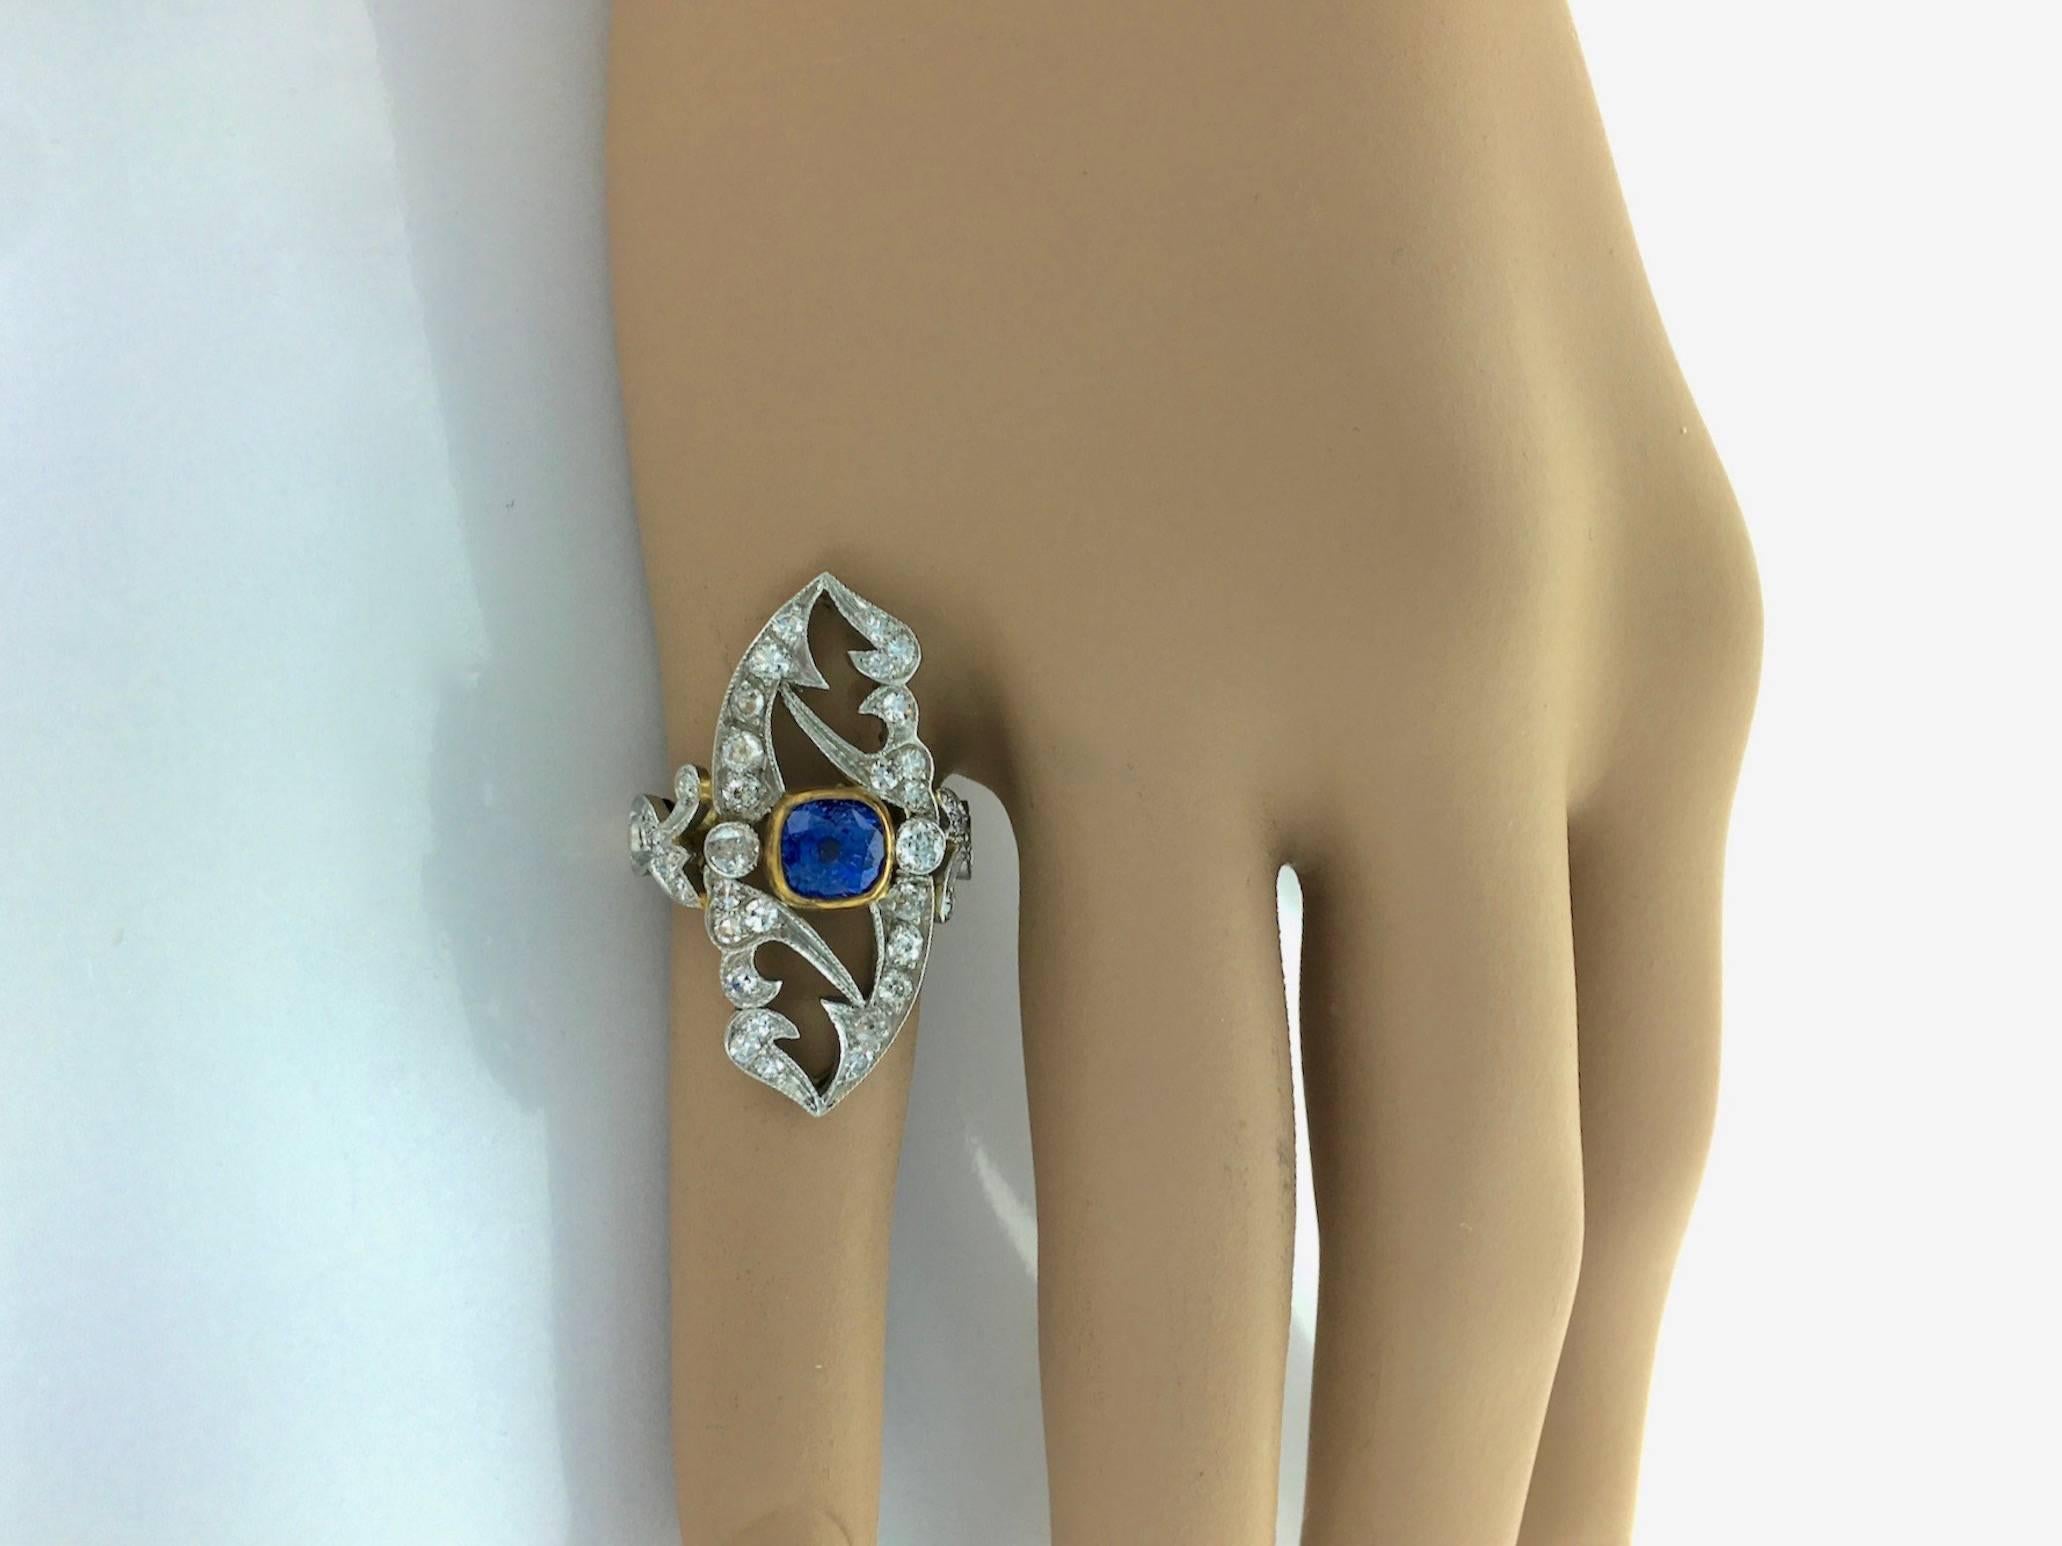 Incredible Art Nouveau design Platinum and Gold ring centered by a cushion blue Sapphire surrounded by Old-mine cut Diamond.

Gross weight: 7.37 grams.